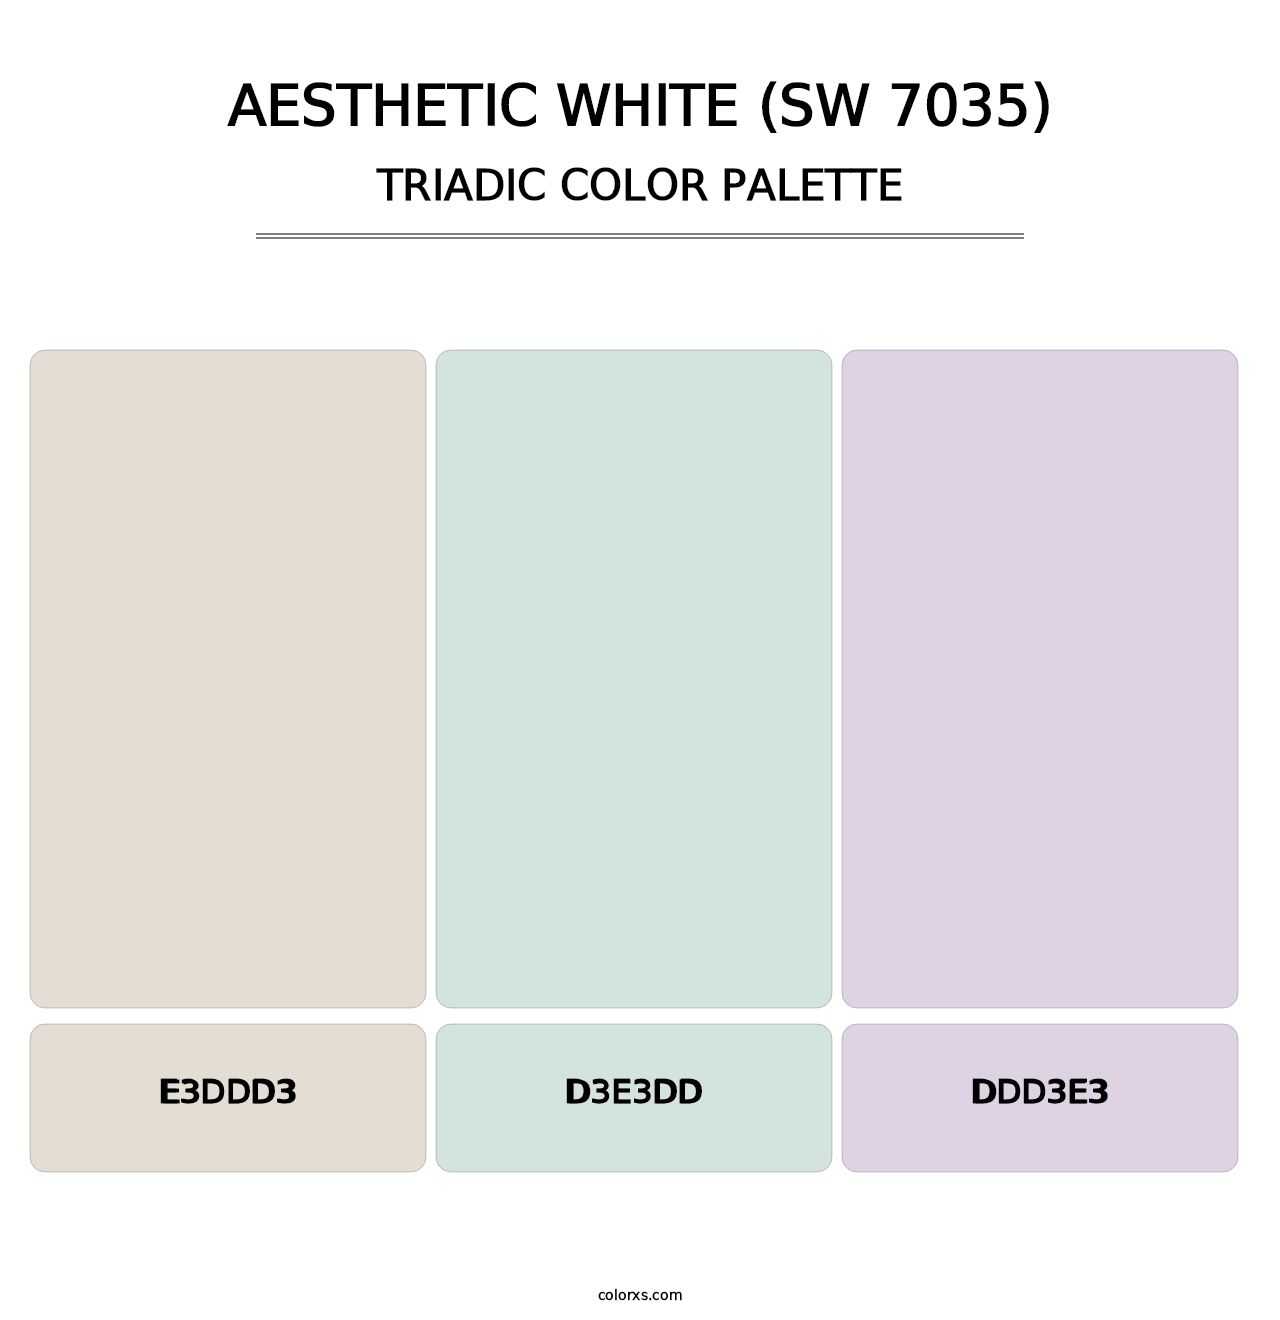 Aesthetic White (SW 7035) - Triadic Color Palette